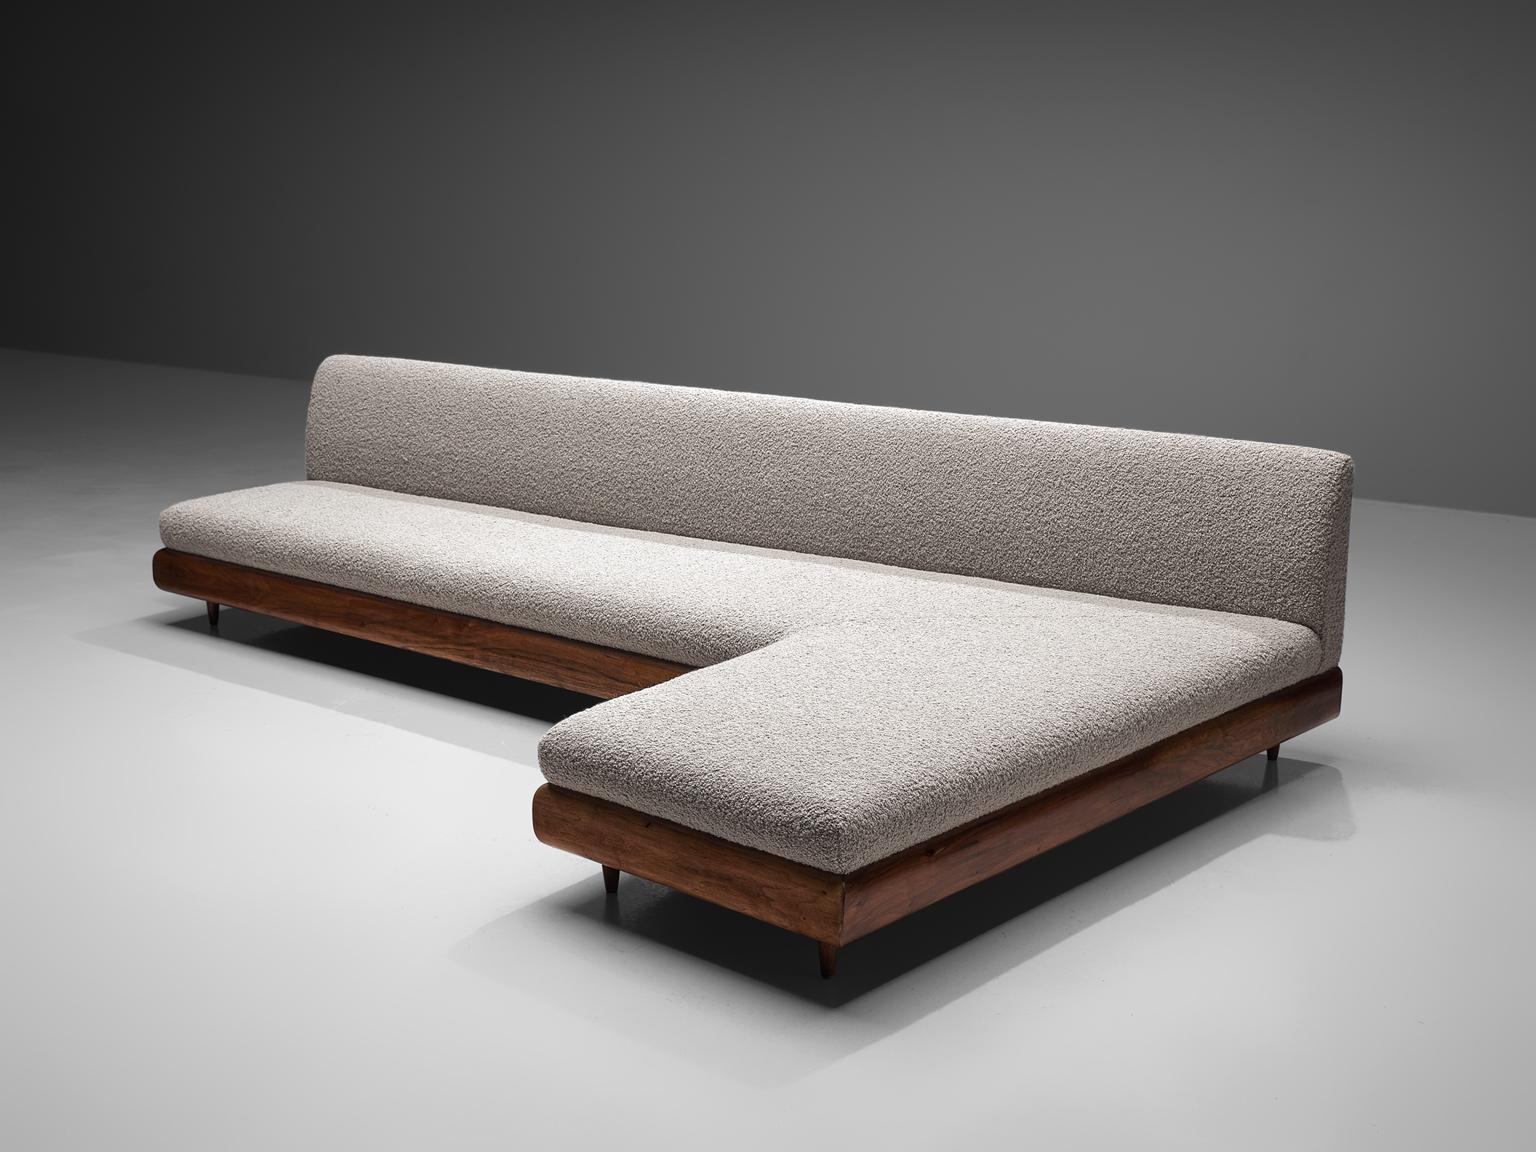 Adrian Pearsall, 'Boomerang' sofa, walnut, fabric, United States, 1960s

This 'boomerang' sofa has a unique shape with sinuous lines which create a monumental and inviting look. The right-facing sofa is a great addition to a living area or dining